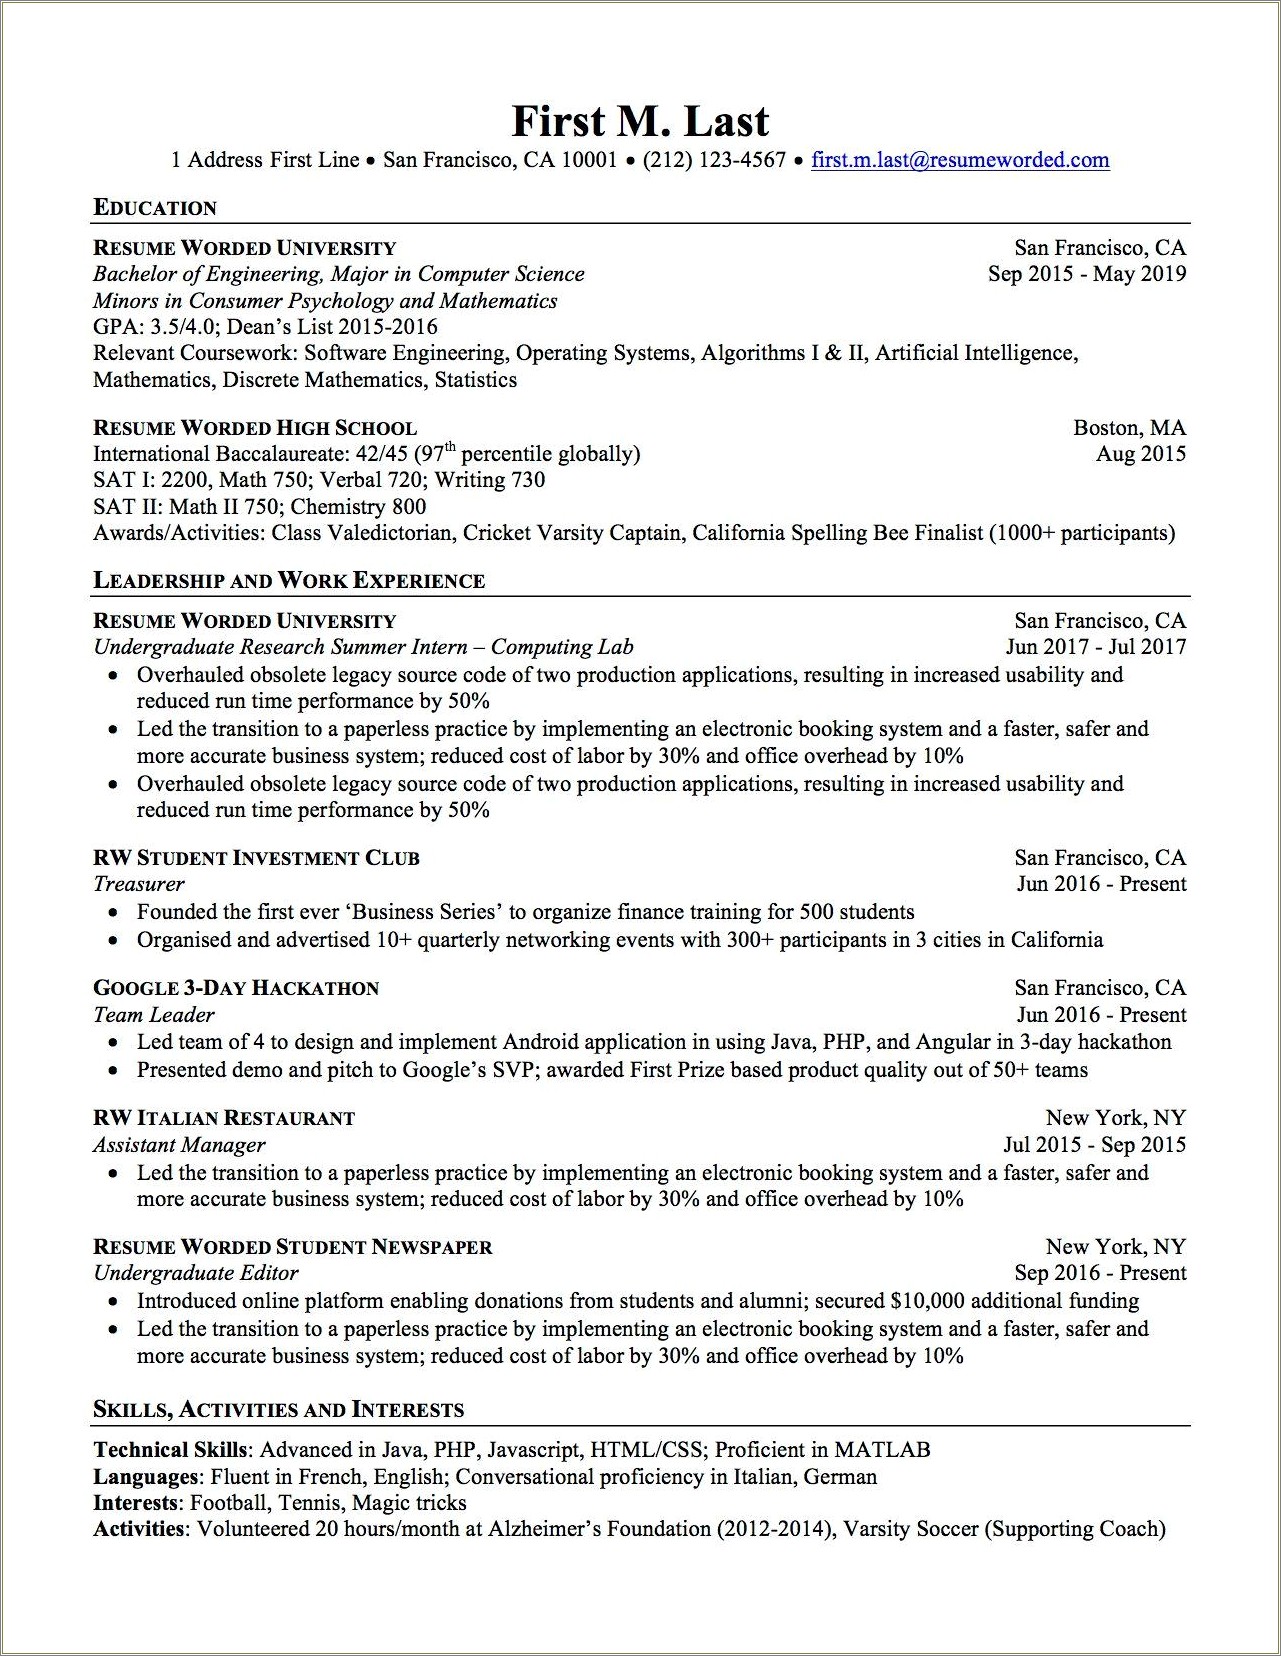 Adding Relevant Course Work In Resume Engineering